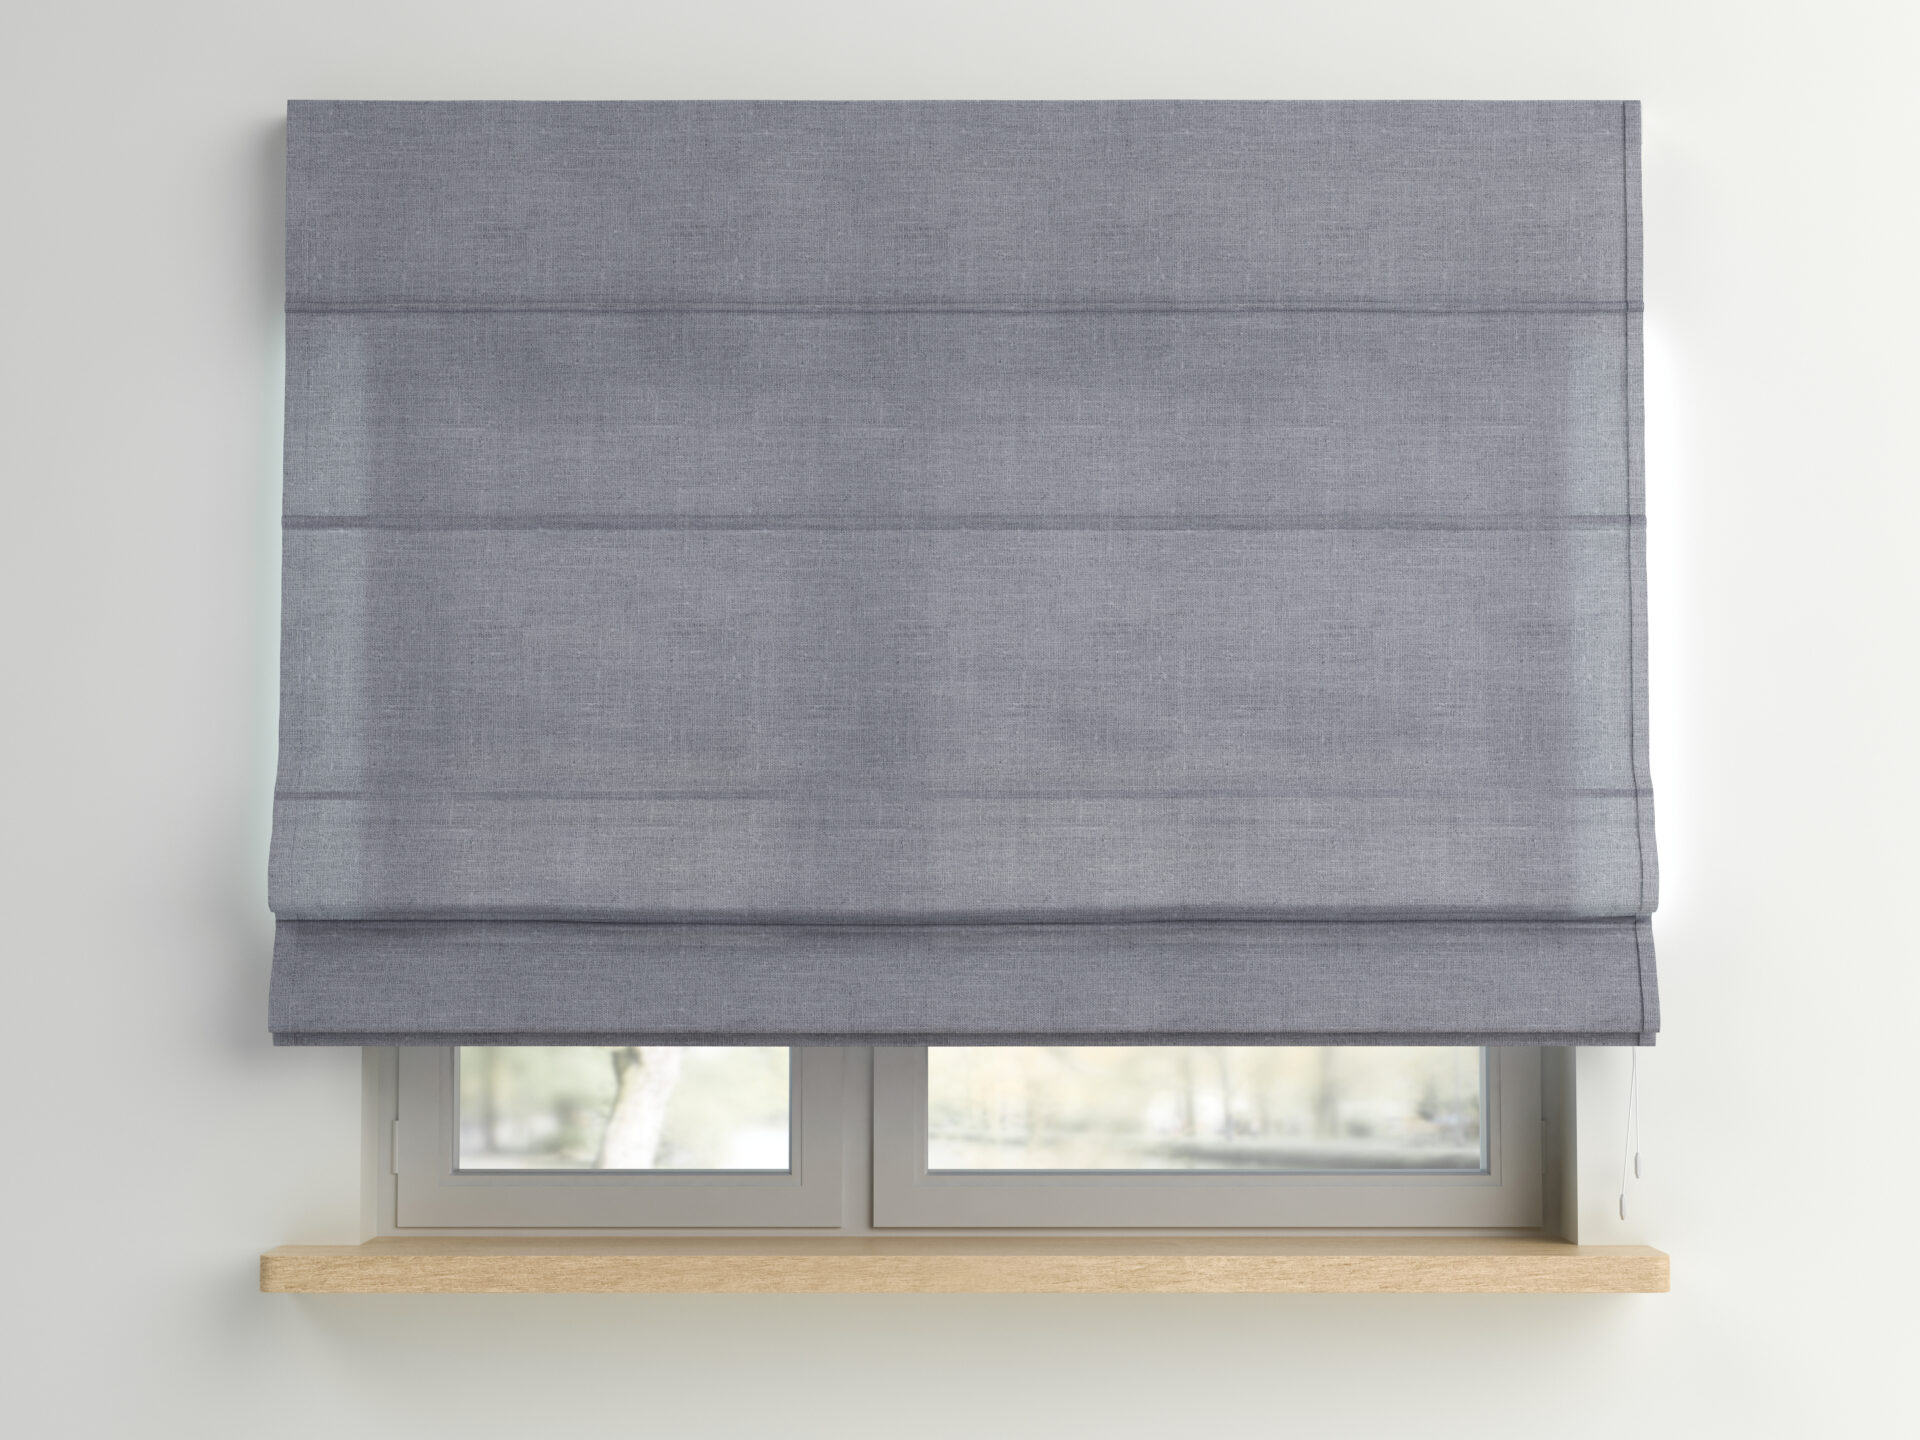 Gray roman shades on a window in a home.